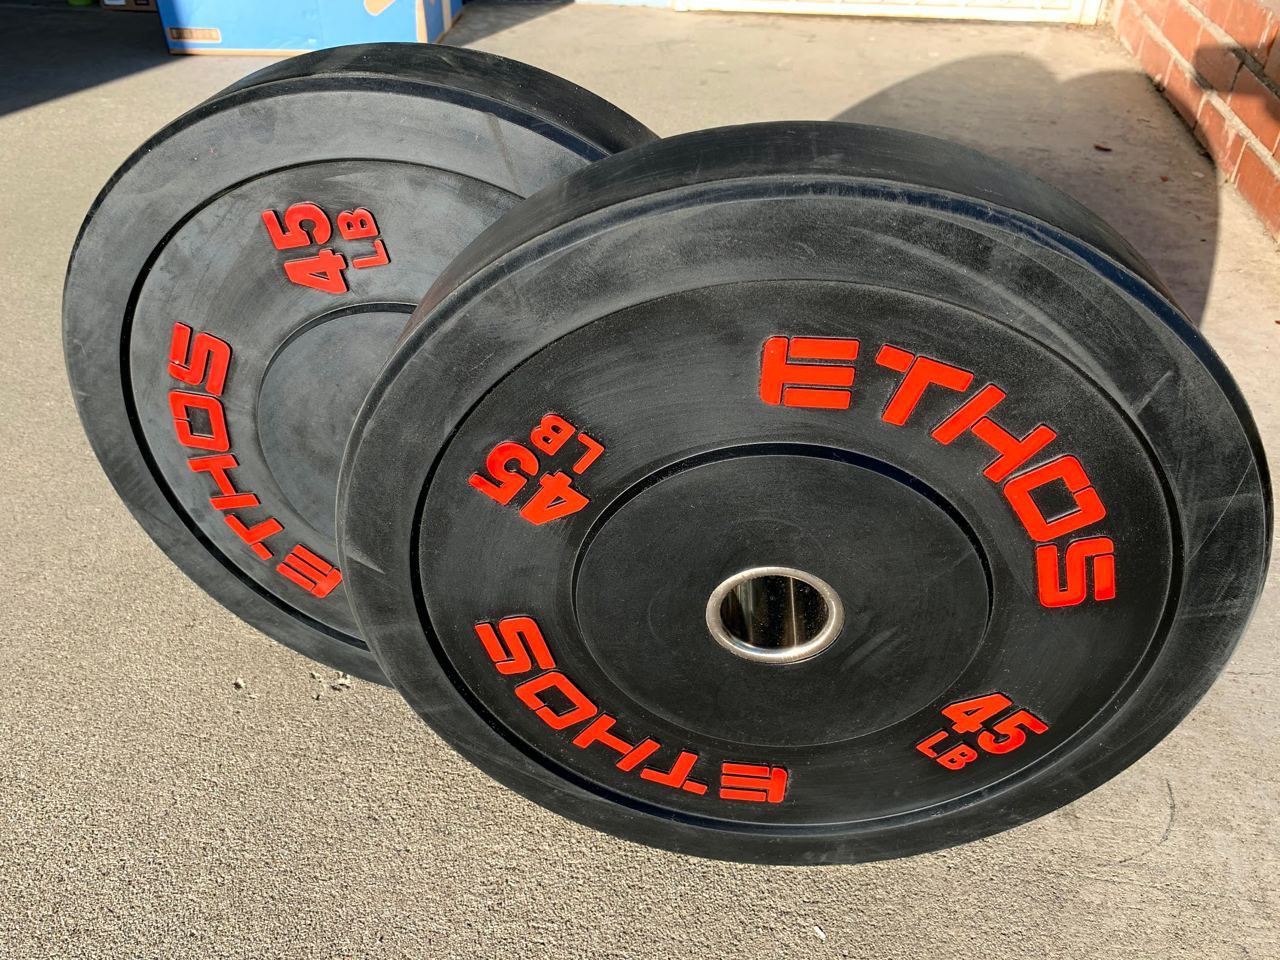 Ethos Bumper Plates Olympic Weights 45 lbs pair, 90 lbs total [PRICE FIRM]